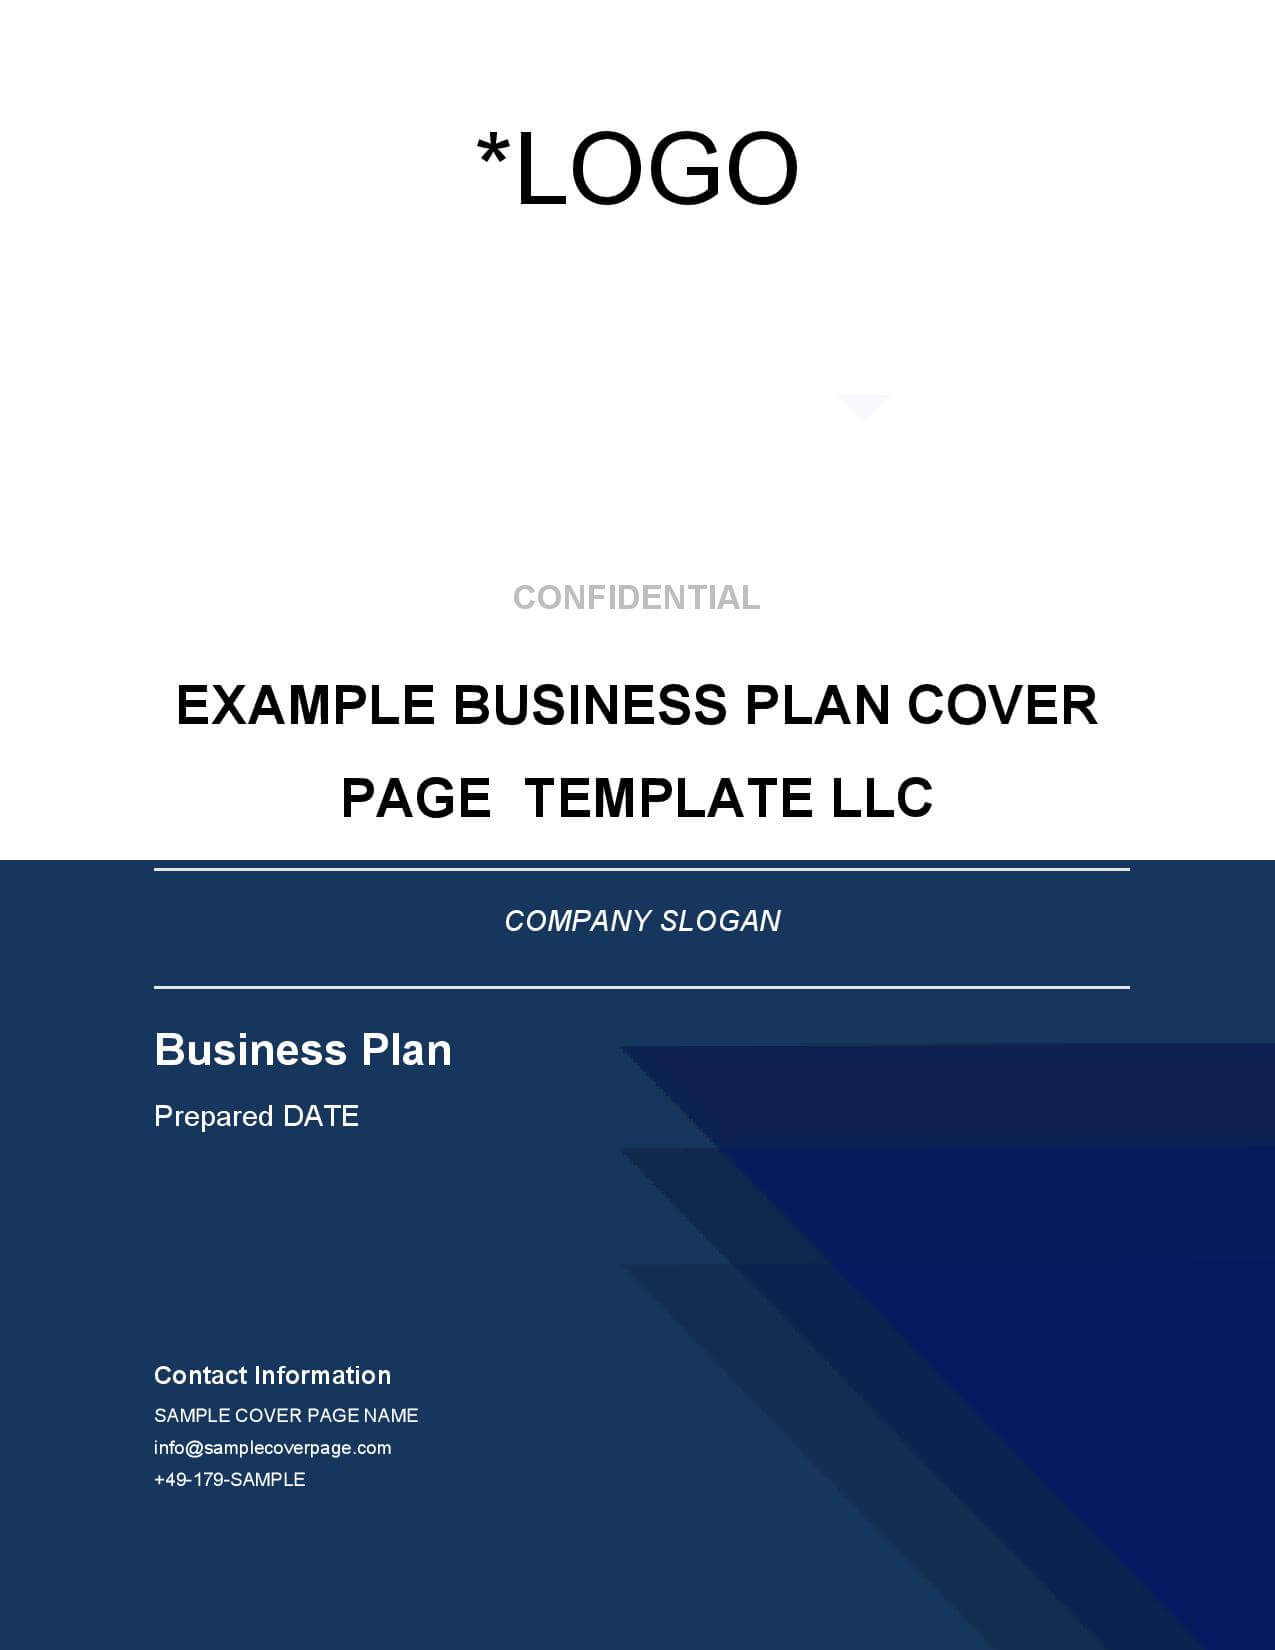 Business plan cover page templates for students